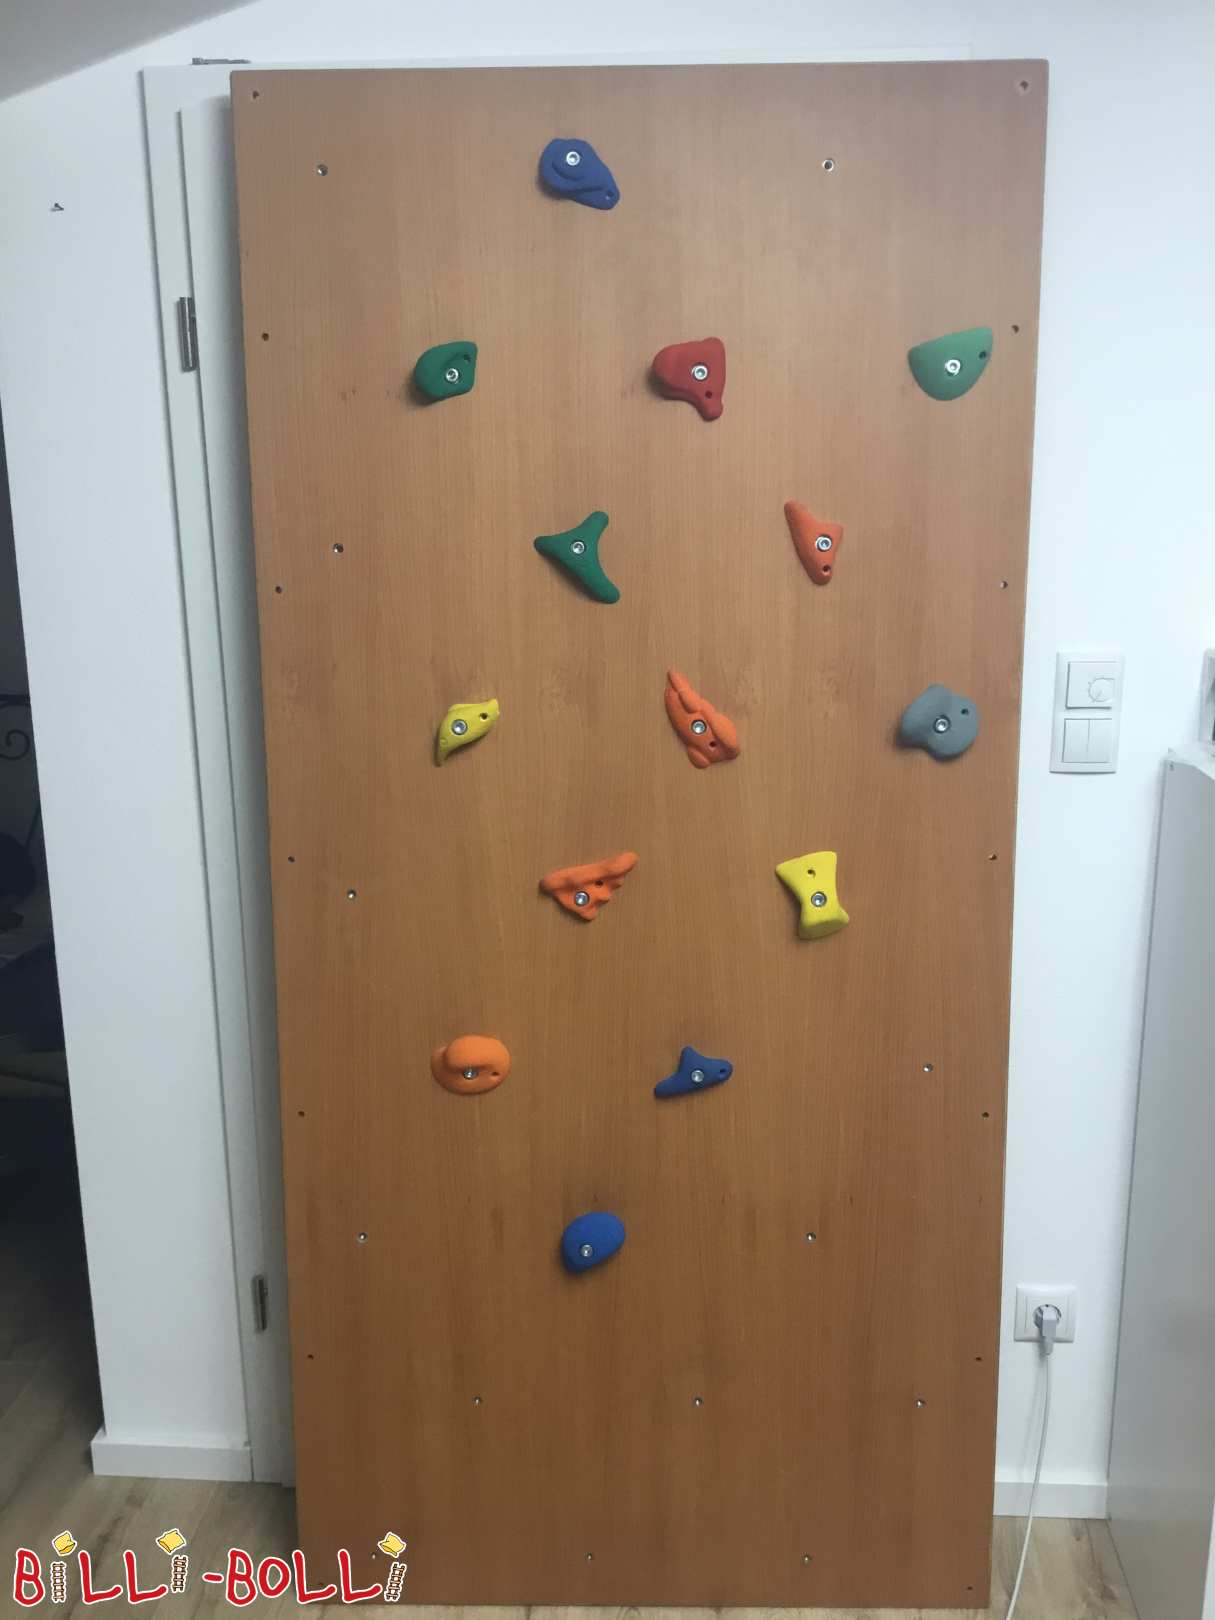 Climbing wall (Category: Accessories/extension parts pre-owned)